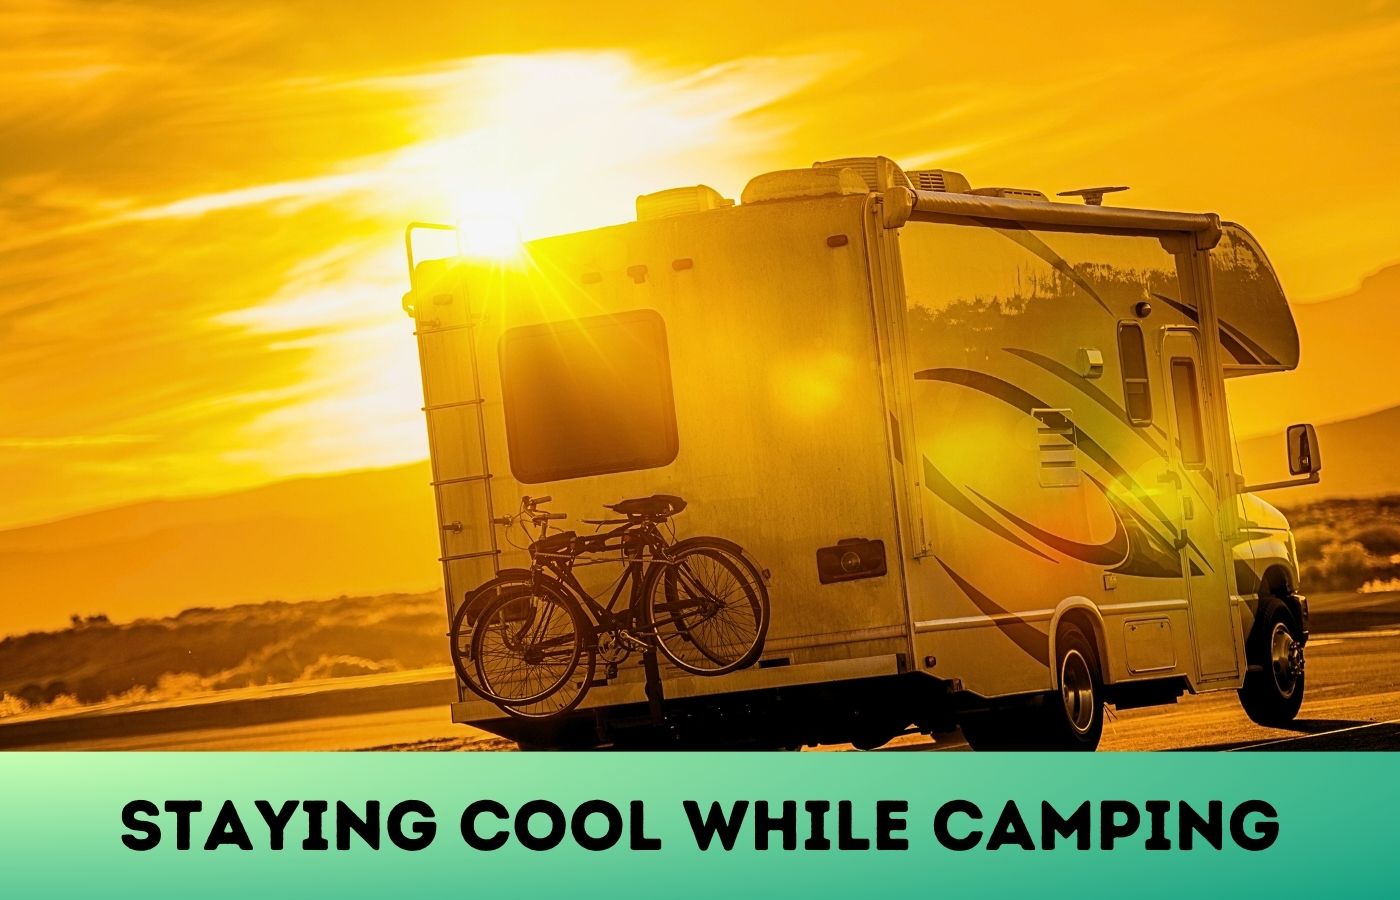 RV going for summer camping